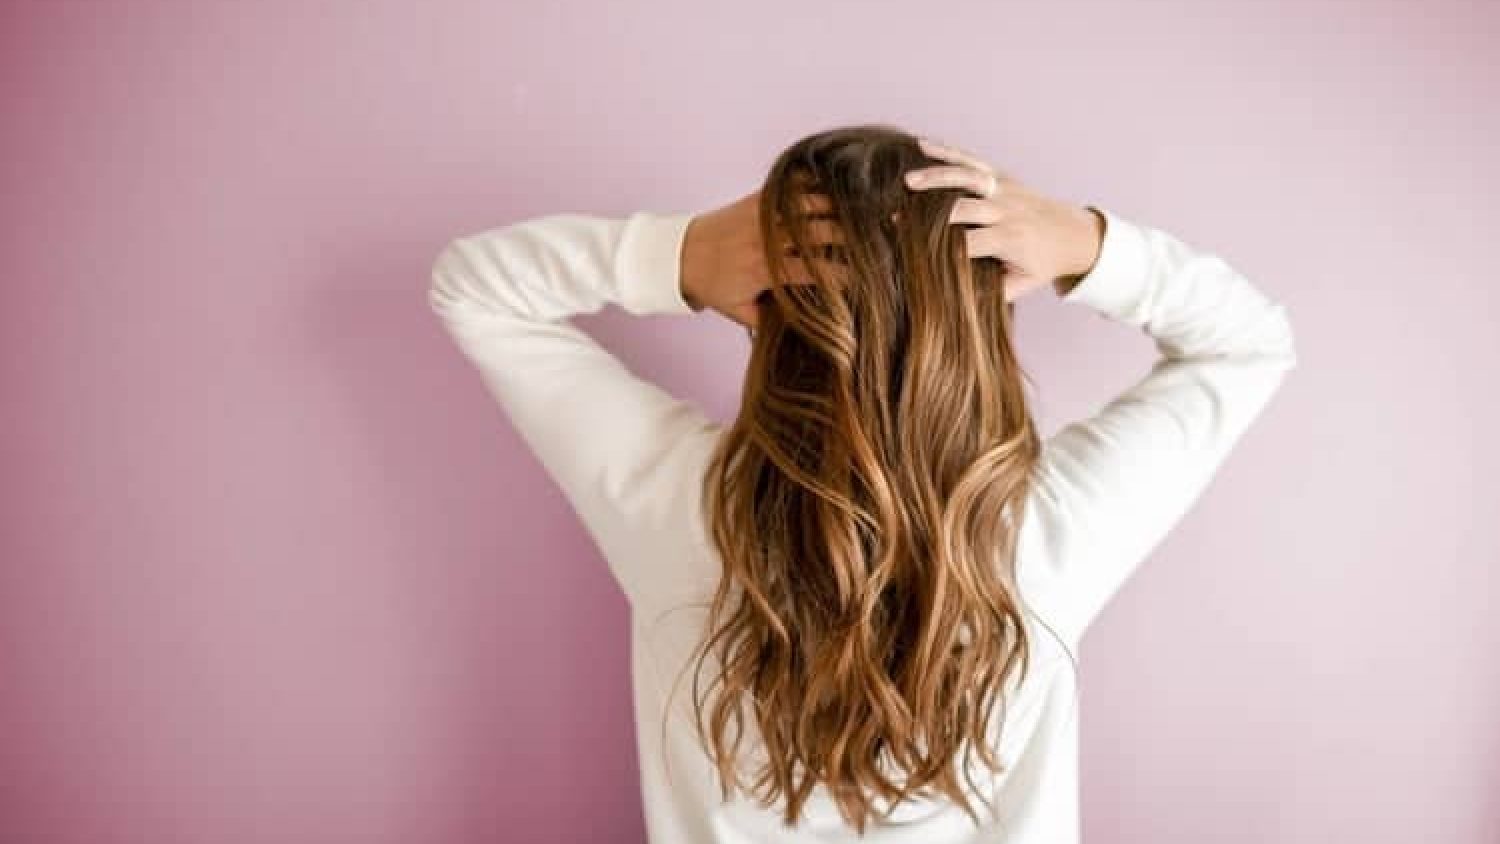 A Complete Guide on How to Use a Hot Air Brush to Curl Your Hair